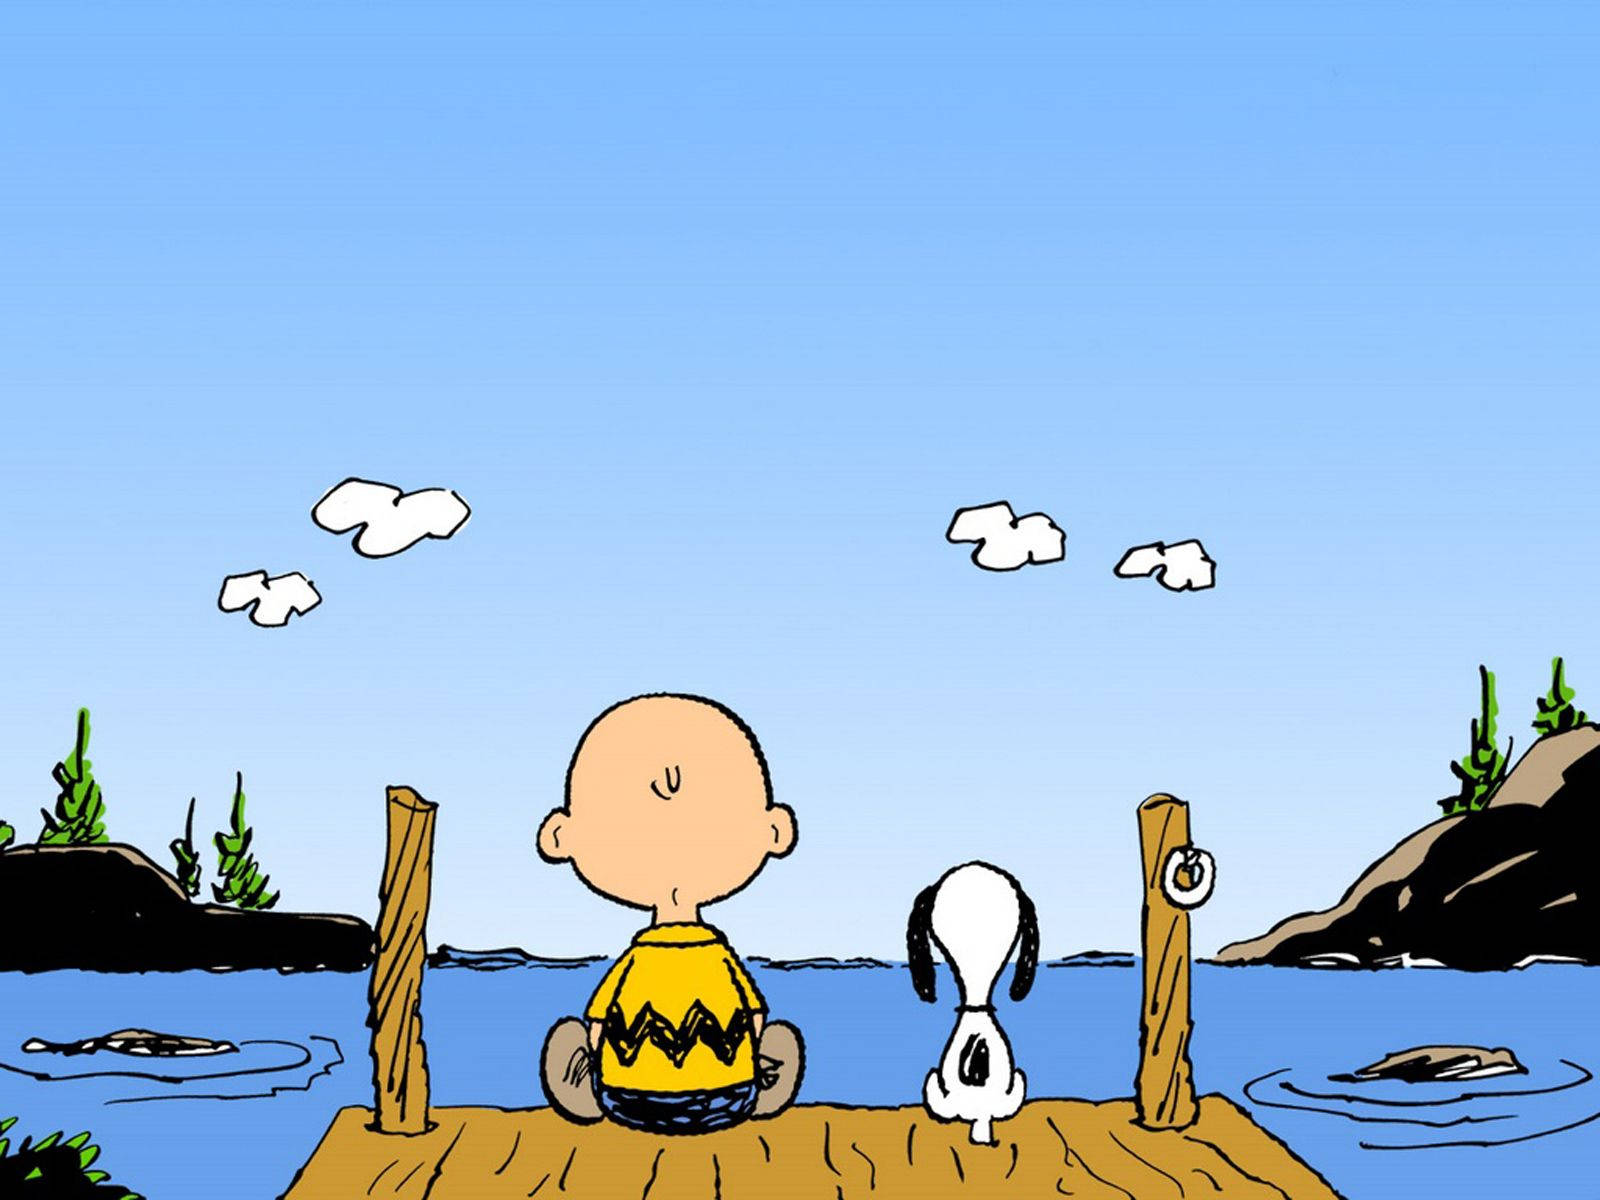 Charlie Brown And Snoopy In Lake